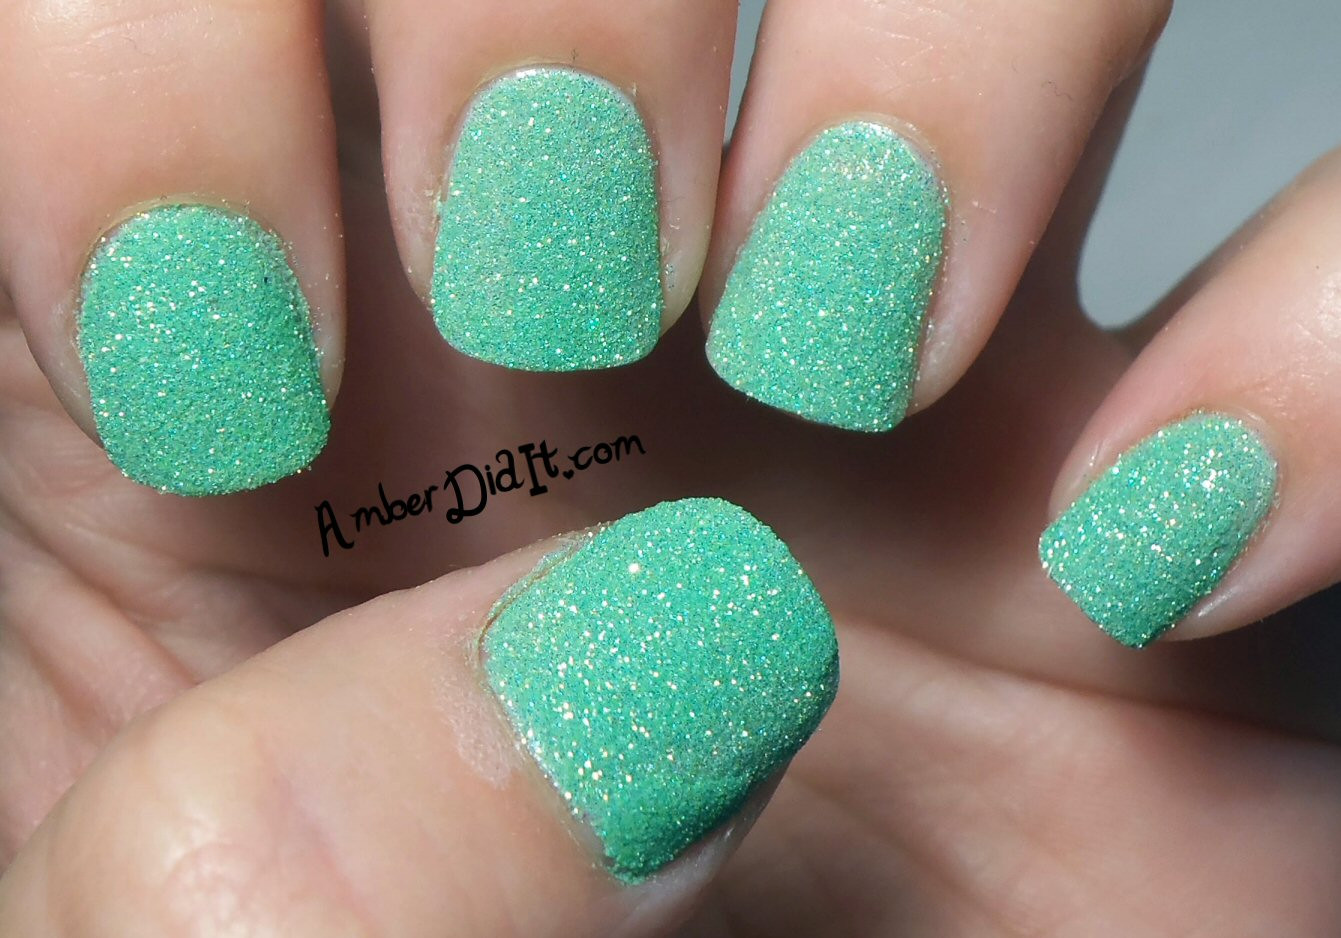 1. Glitter Nail Designs for Girls - wide 4